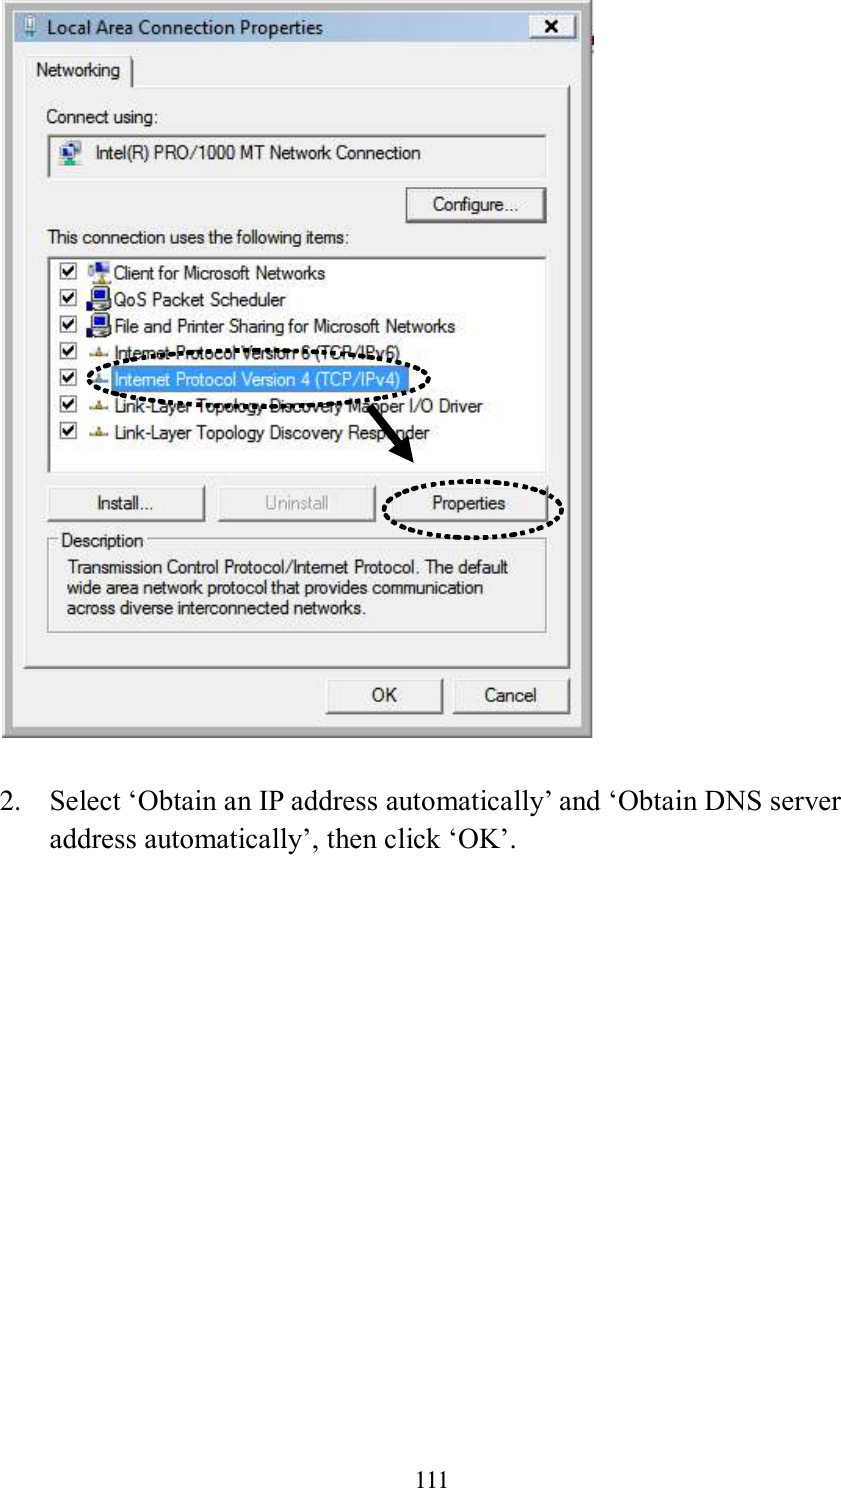 111   2. Select ‘Obtain an IP address automatically’ and ‘Obtain DNS server address automatically’, then click ‘OK’.  